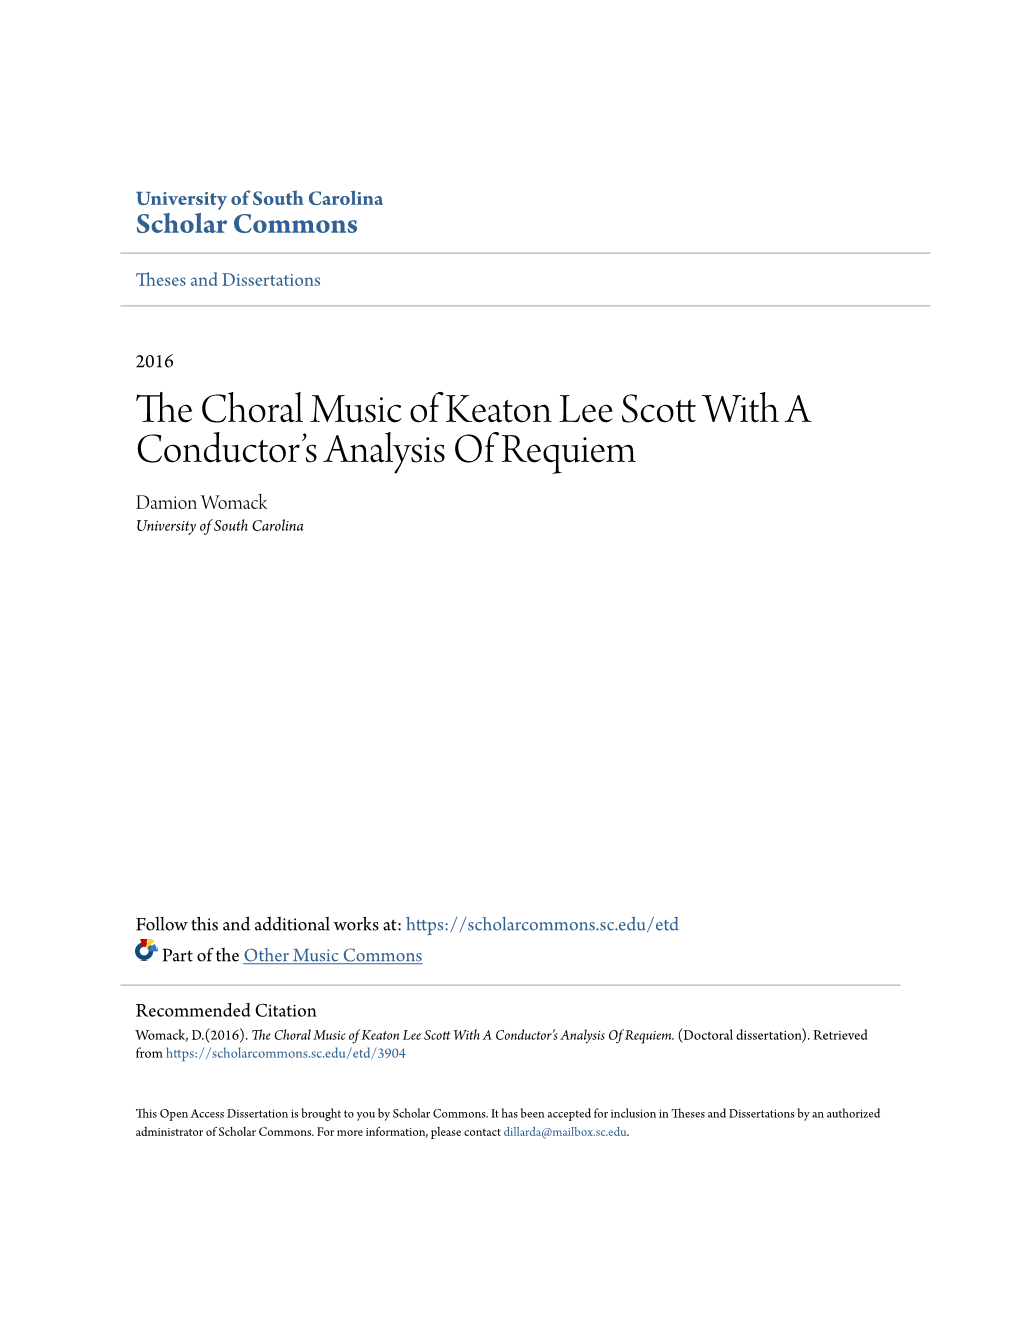 The Choral Music of Keaton Lee Scott with a Conductor's Analysis Of